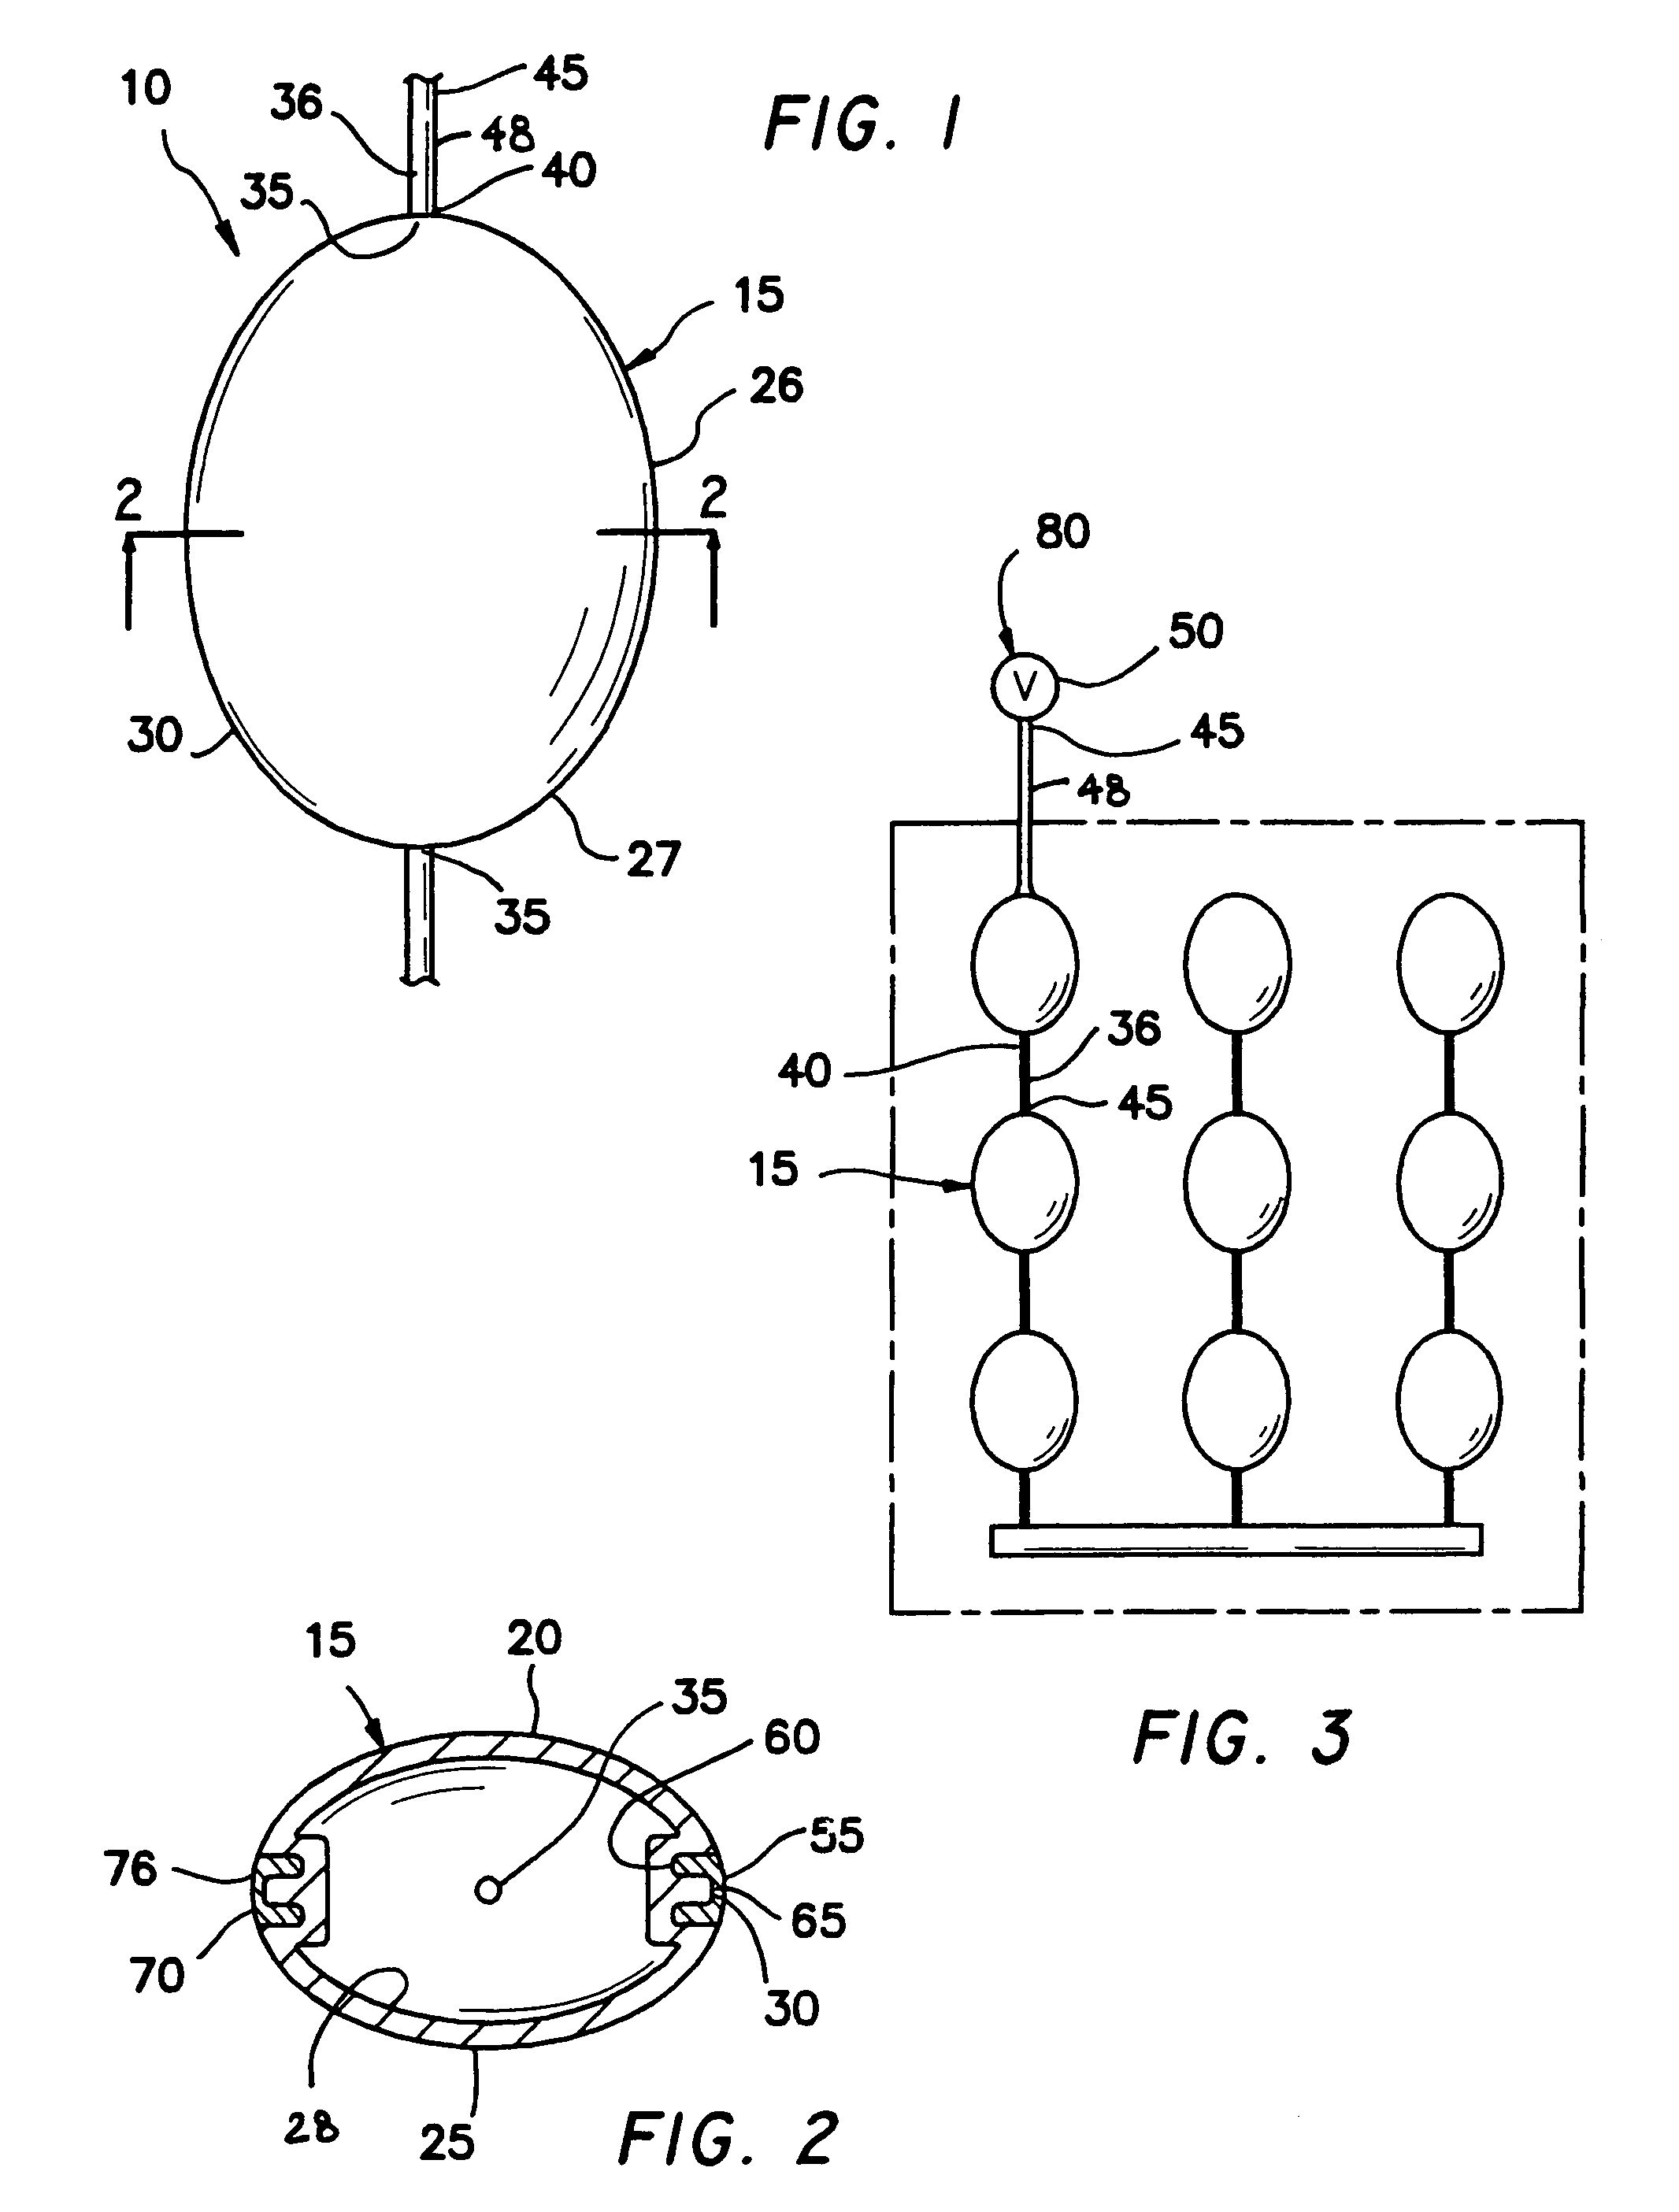 Ovoid flexible pressure vessel, apparatus and method for making same